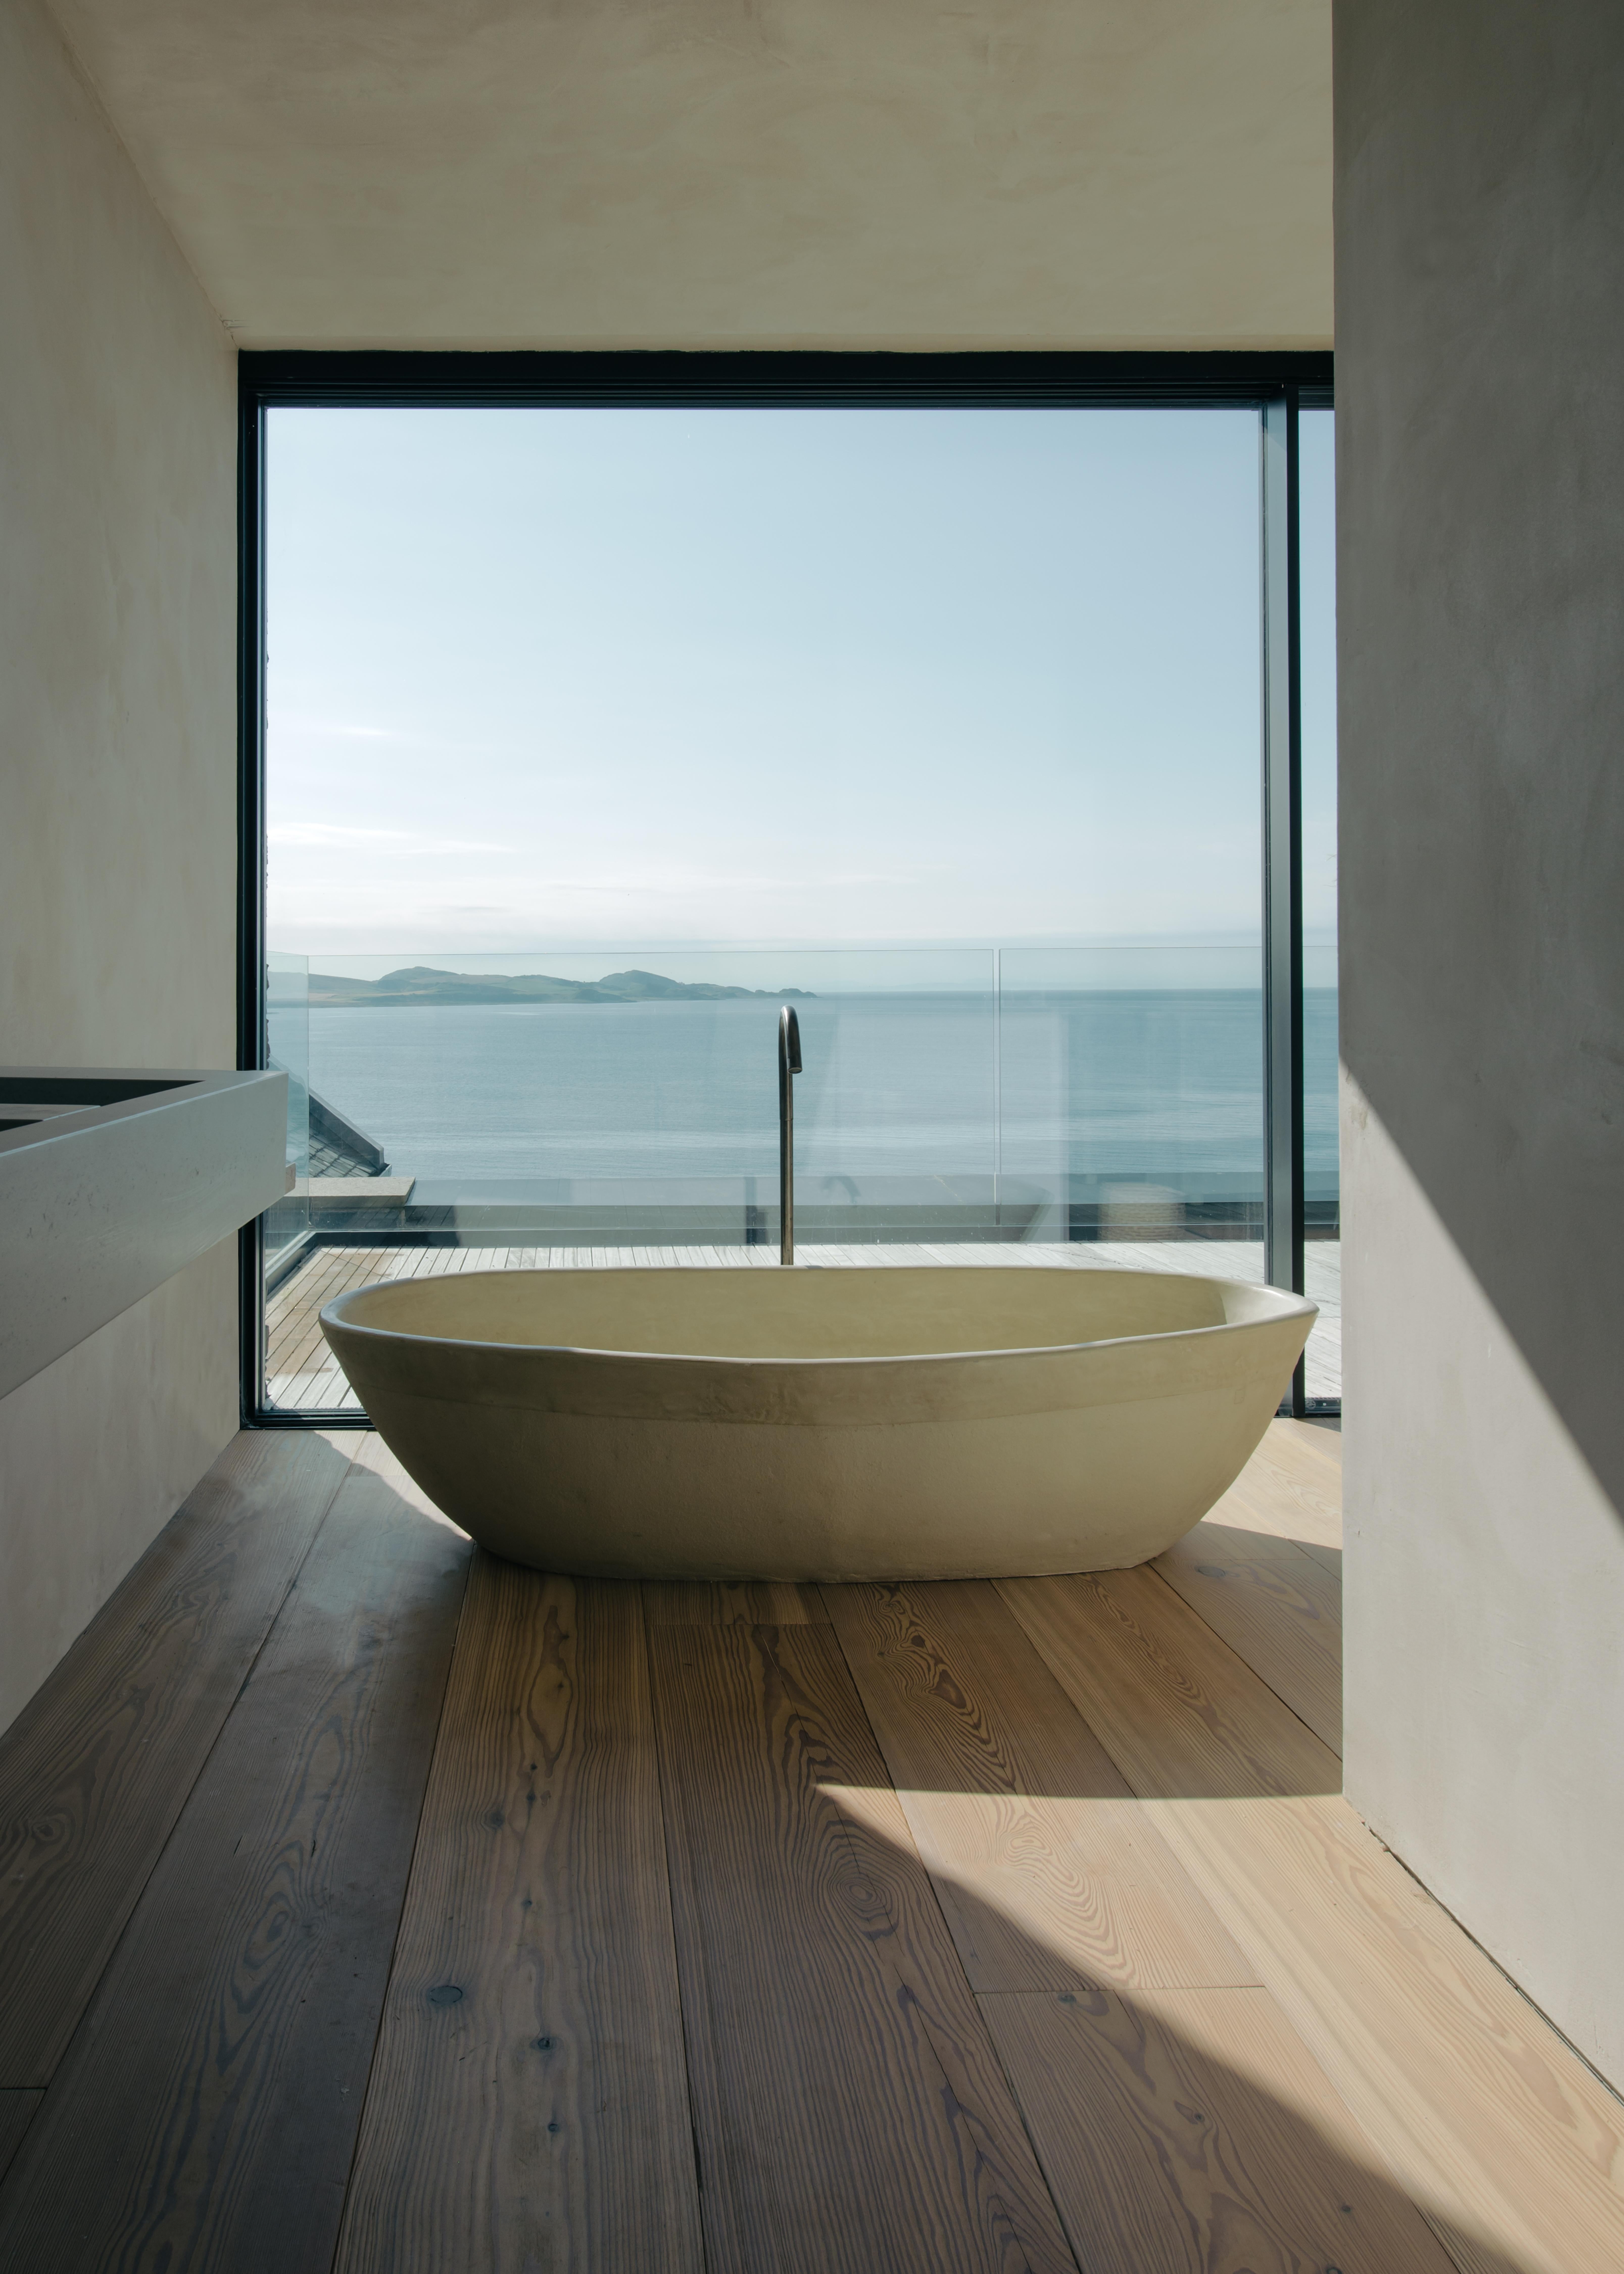 Extra large high clay bathtub by Studio Loho
Dimensions: D 90 x W 190 x H 53 cm
Materials: clay
Other colors and raw or smooth exterior available.
Available in 4 sizes: W 160 x H 42(large), W 160 x H 53(large high), W 180 x H 42(x-large), W 190